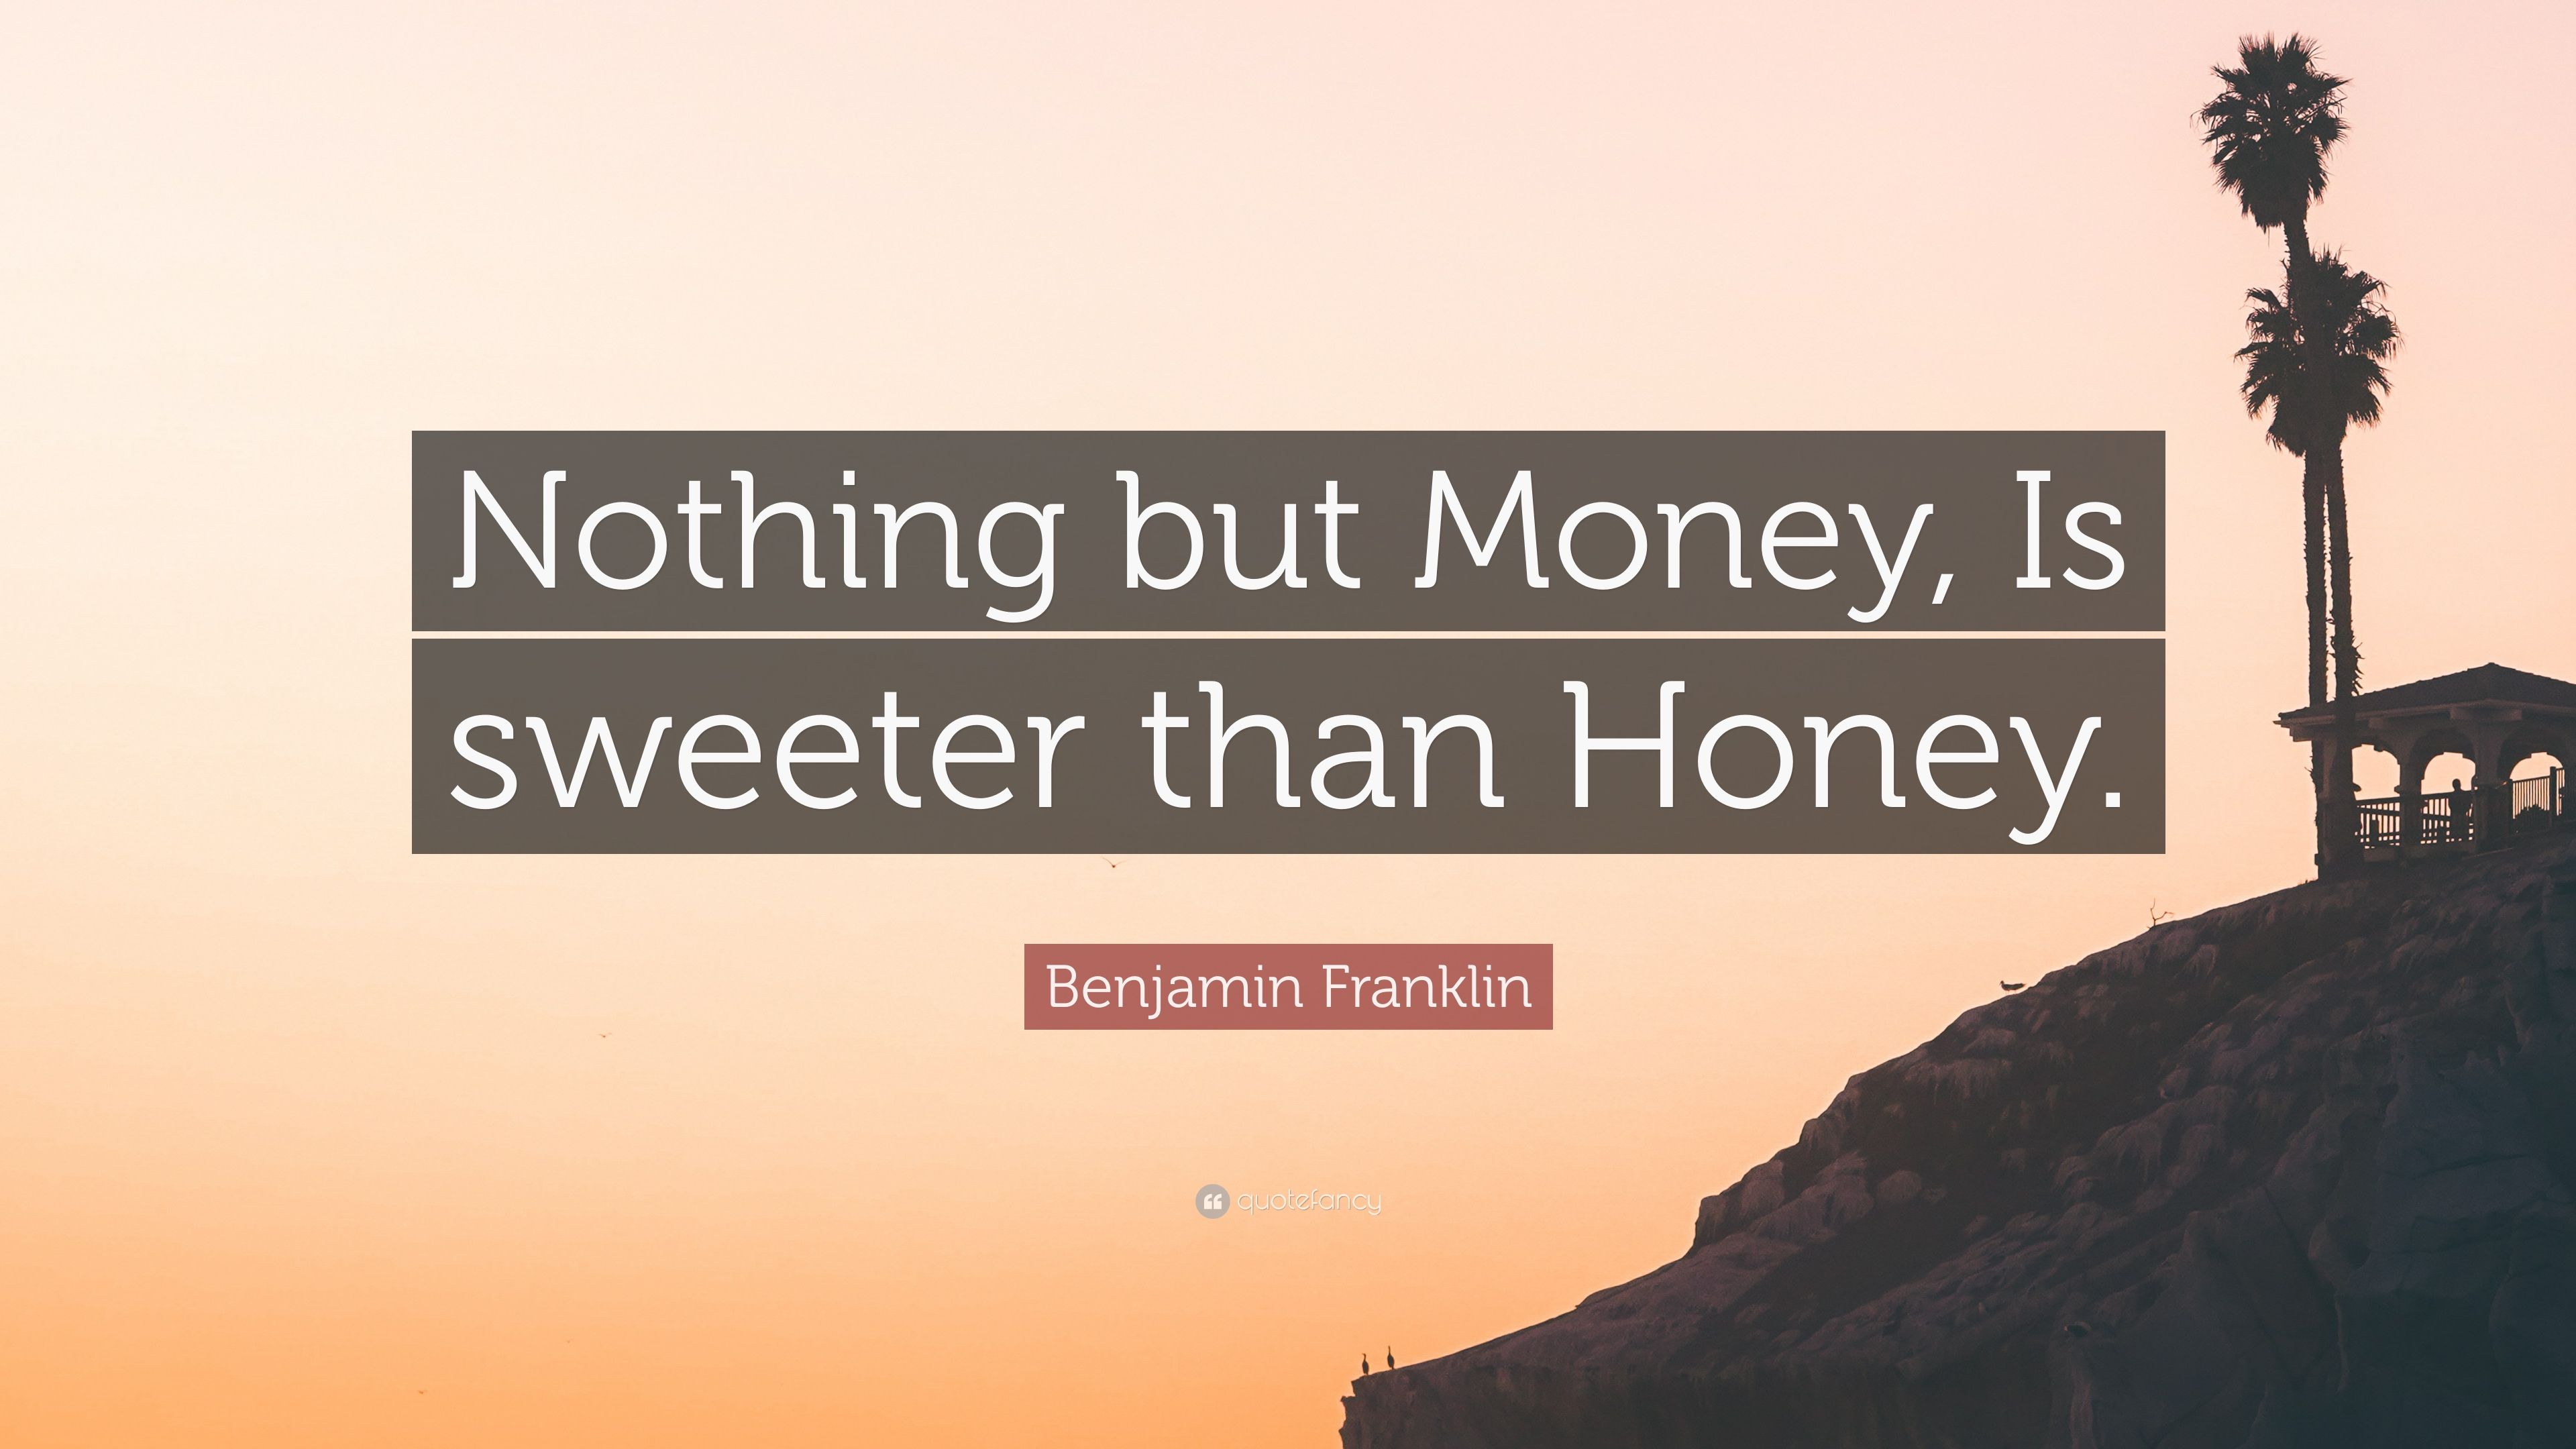 Benjamin Franklin Quote: “Nothing but Money, Is sweeter than Honey